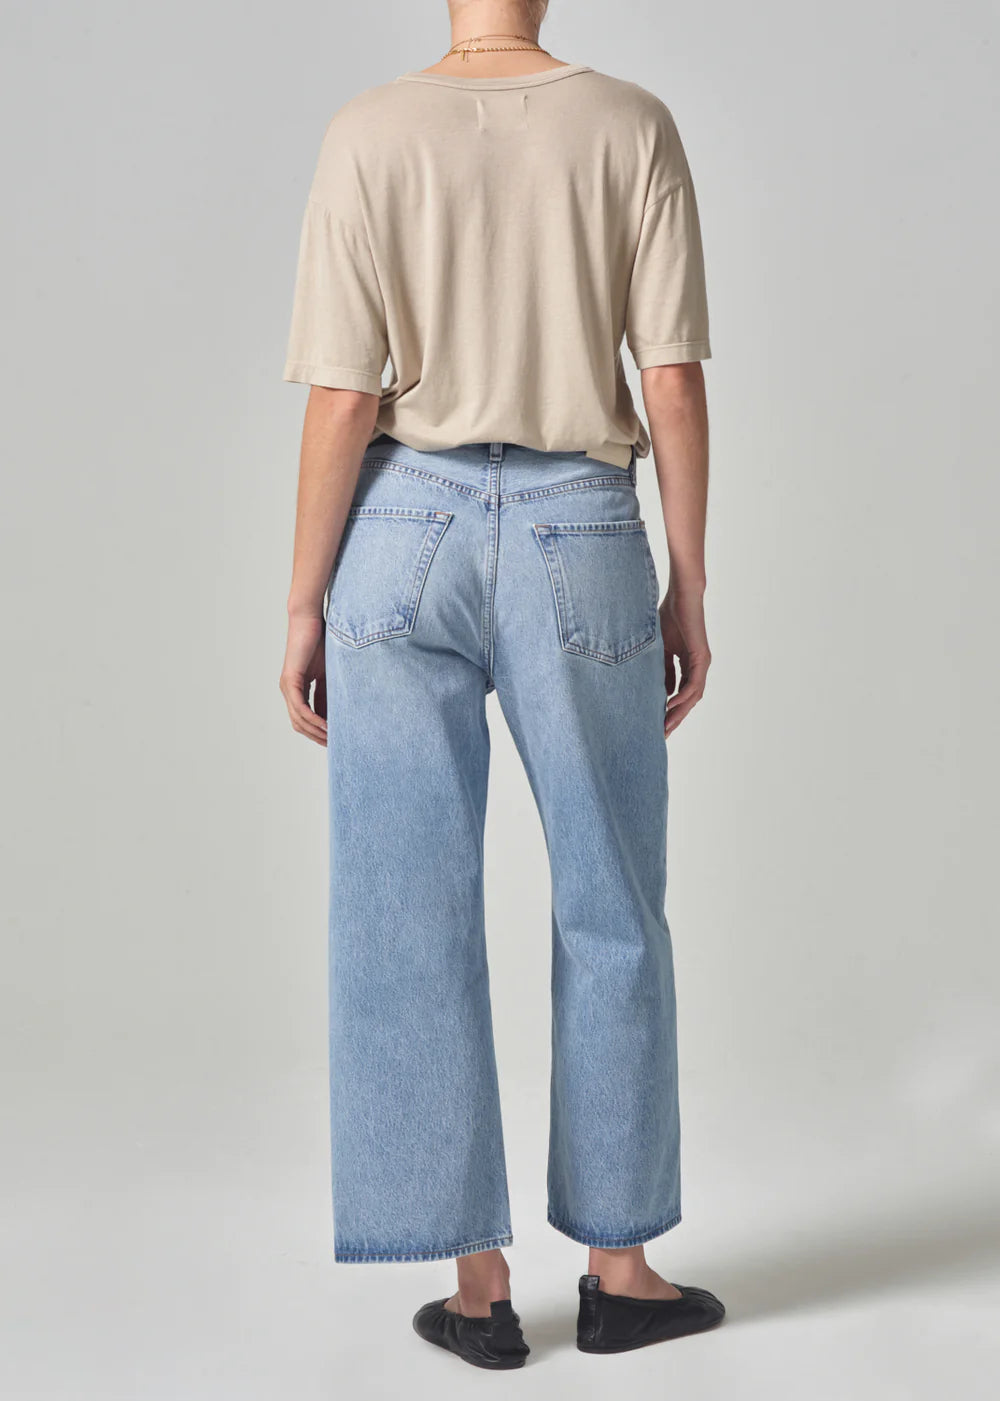 Citizens Of Humanity Gaucho Vintage Wide Leg - Misty